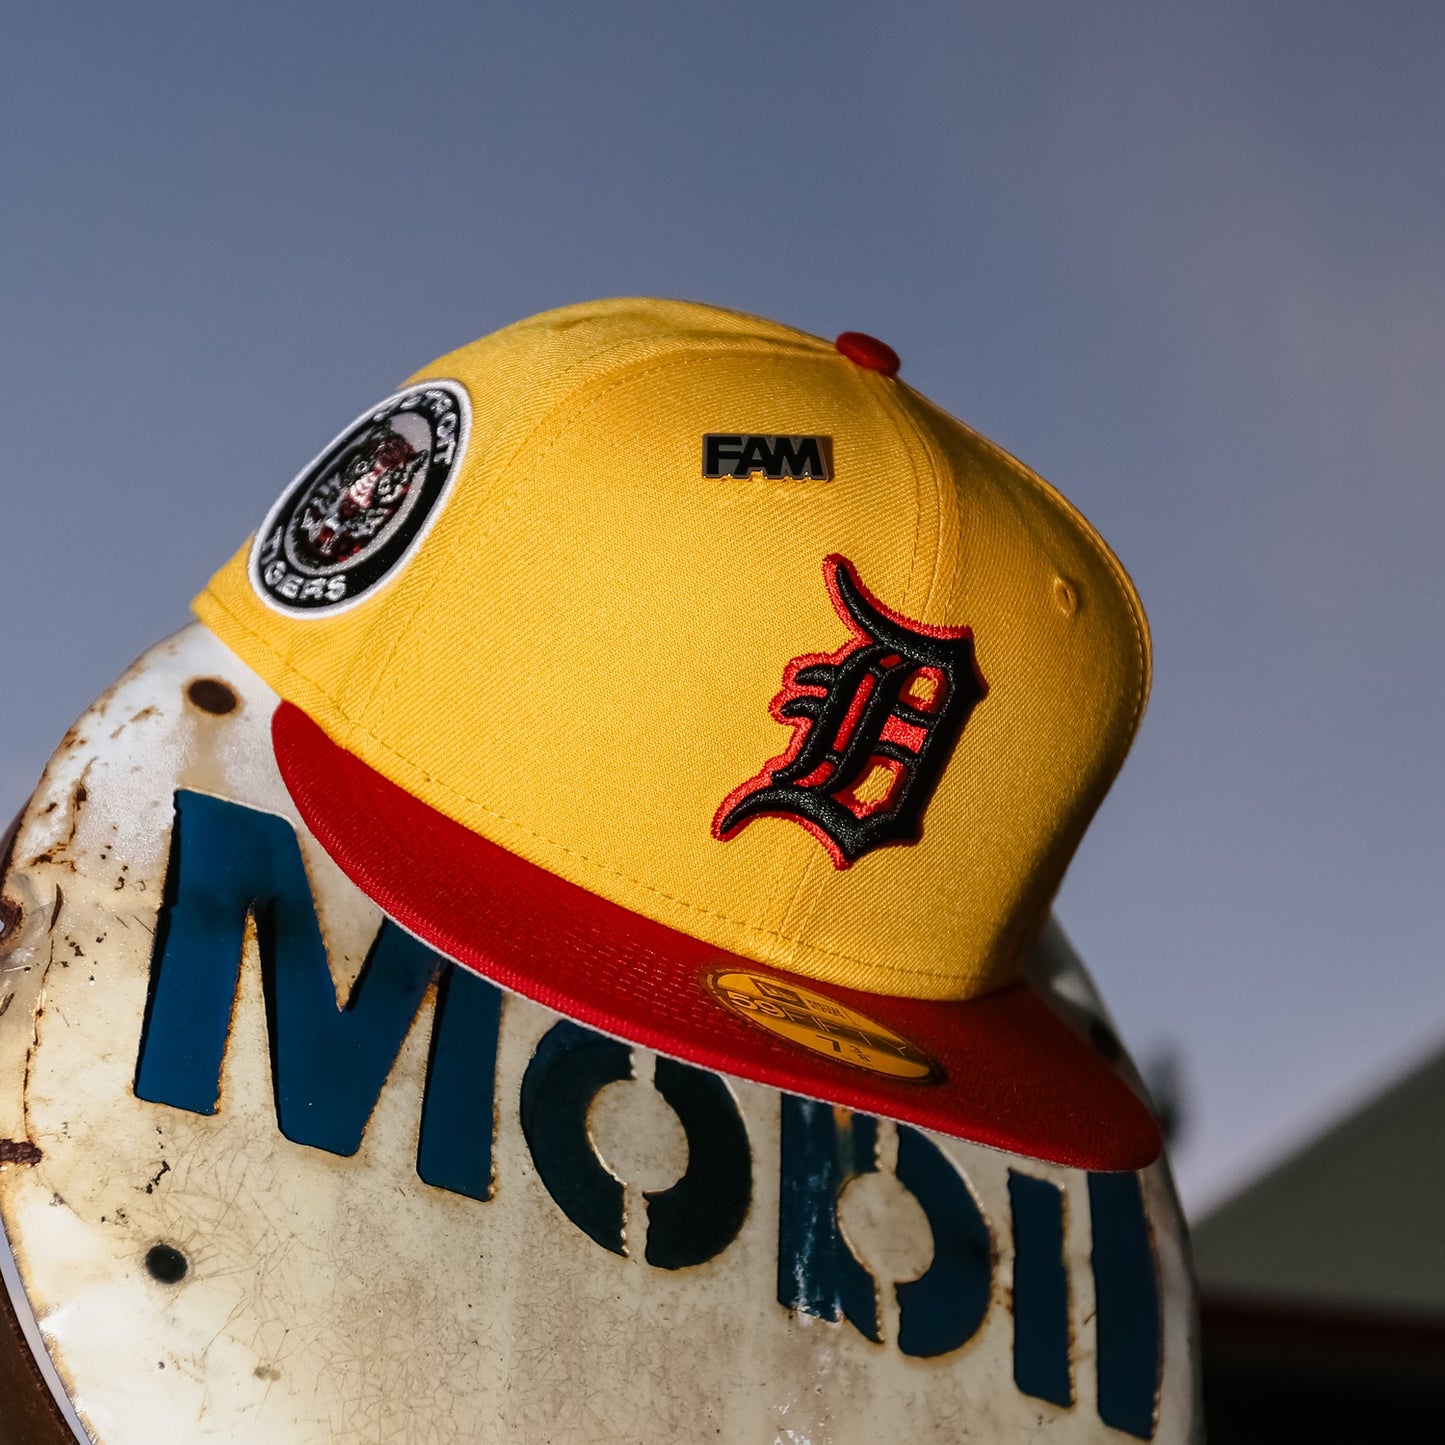 Detroit Tigers and U of M 59FIFTY Fitted Cap by Vintage Detroit Collection